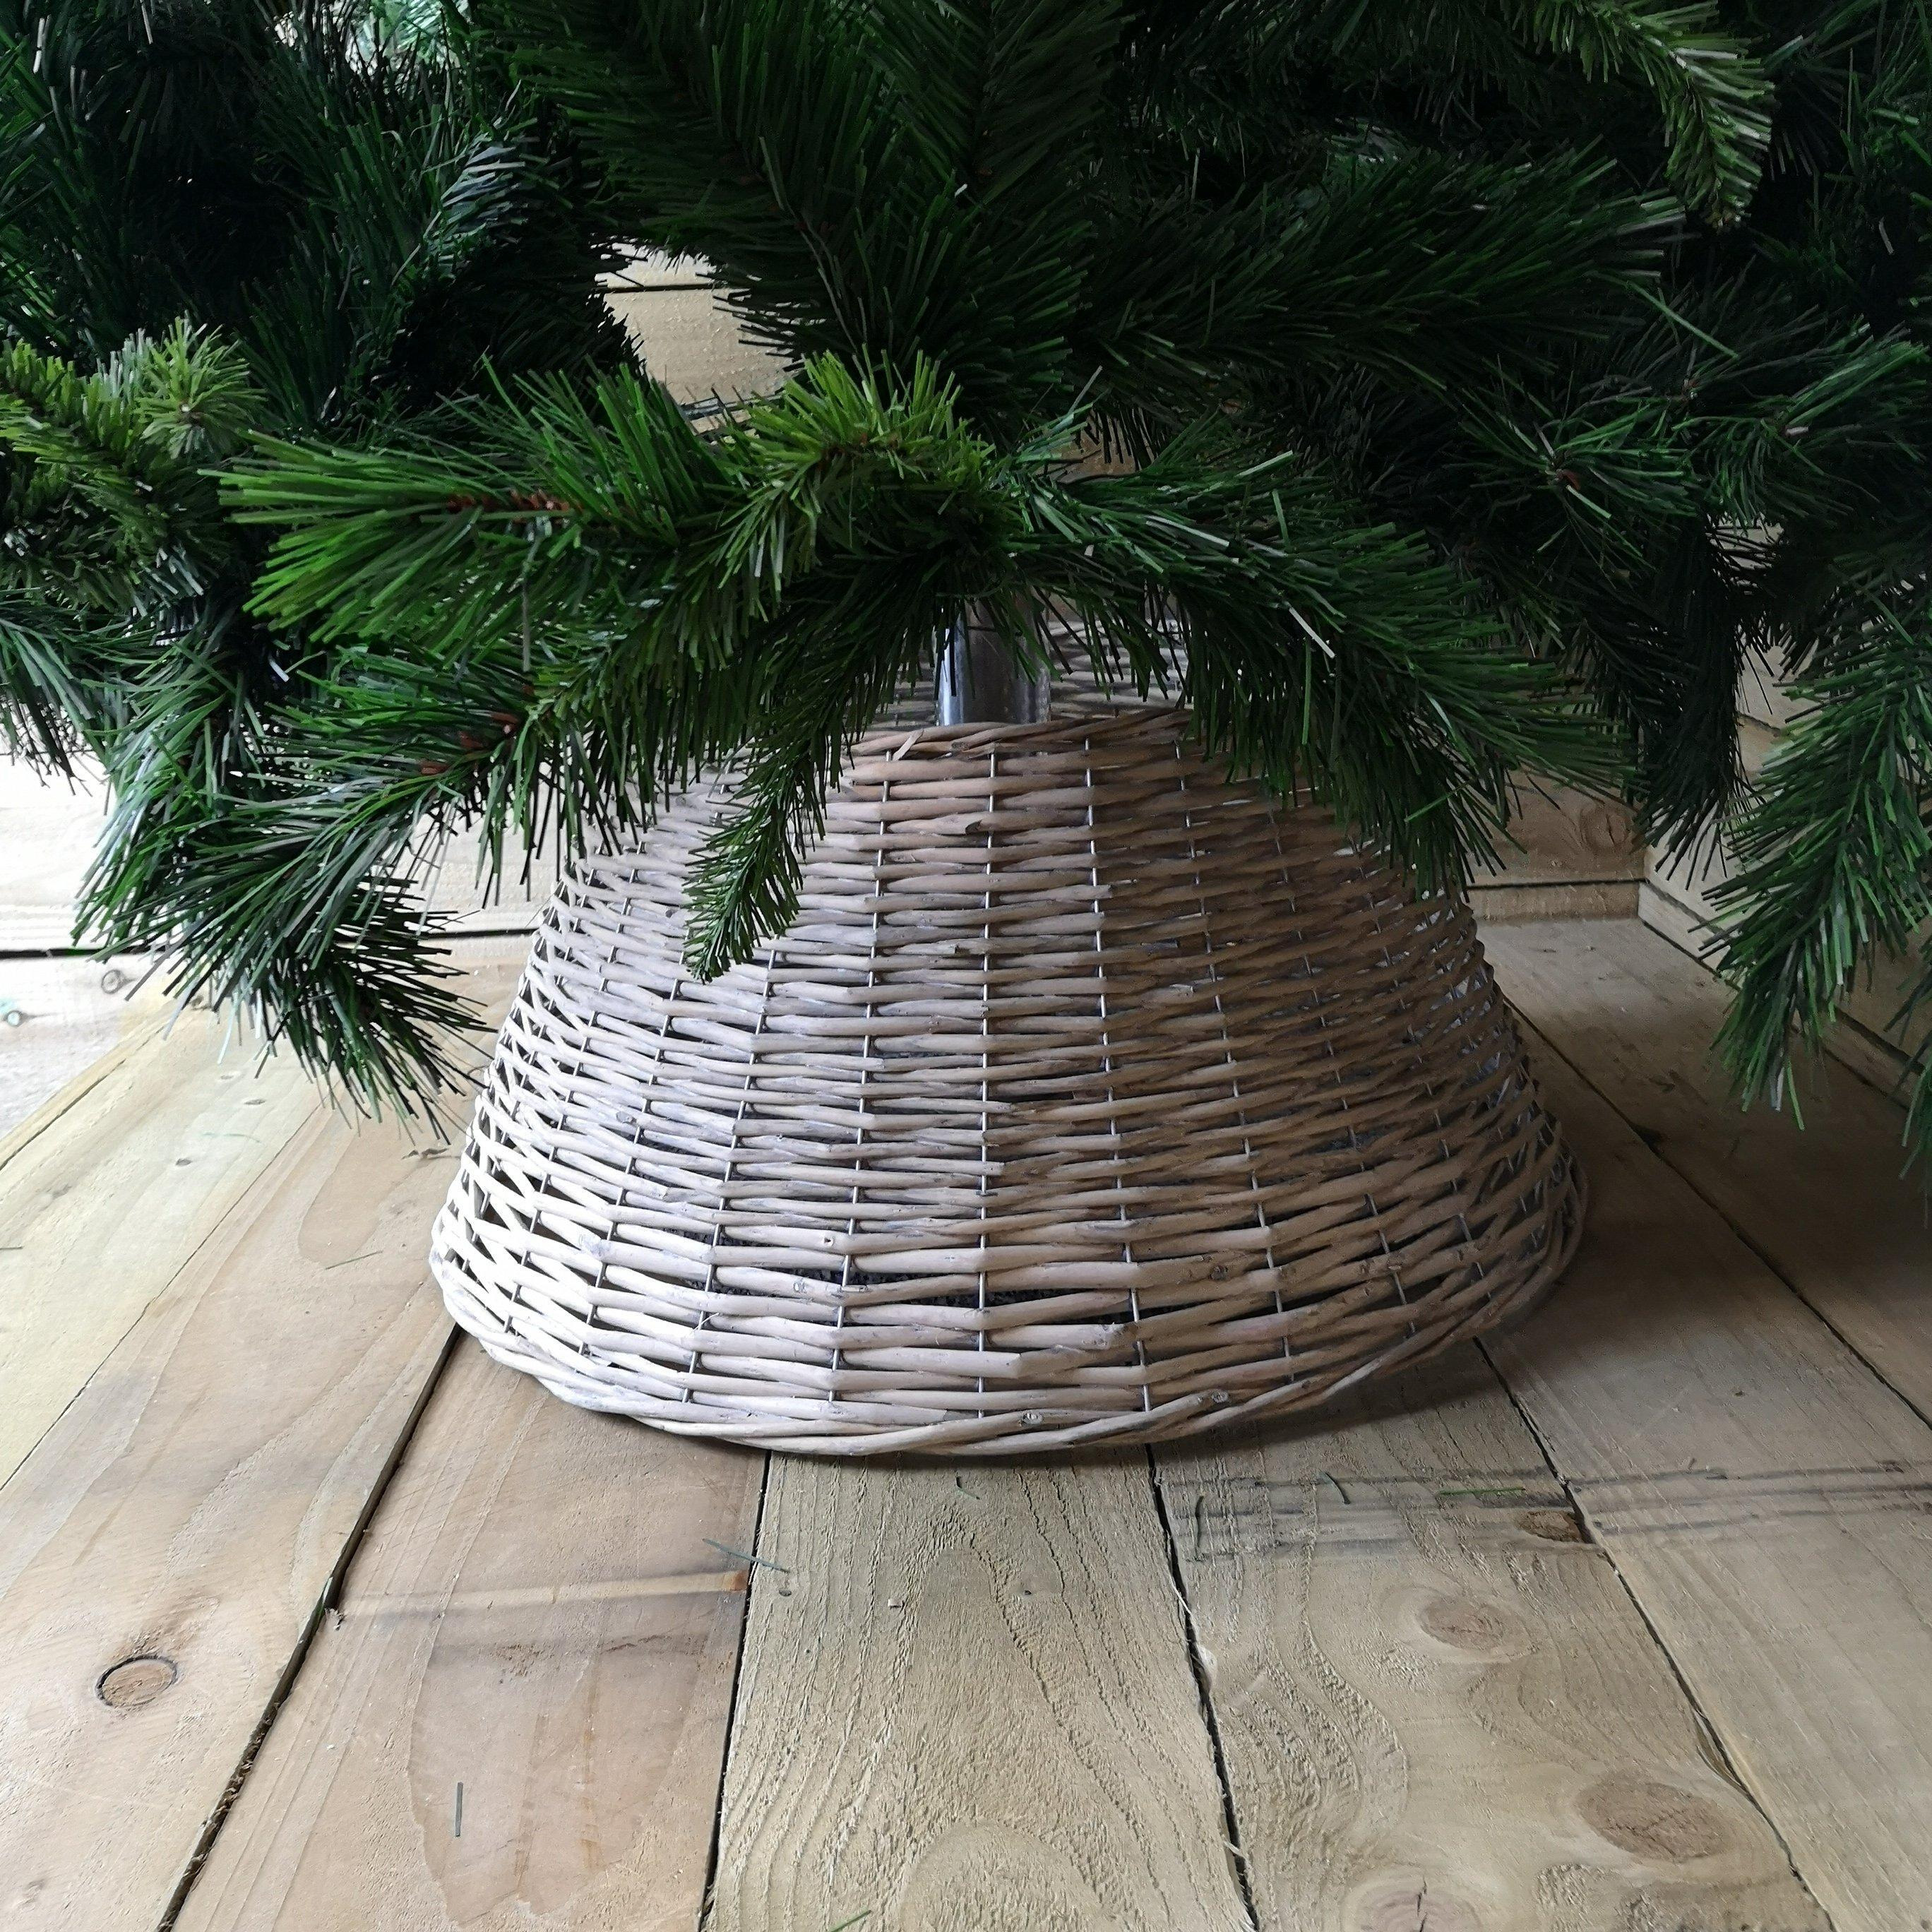 57CM X 28CM Wicker Willow Christmas Tree Skirt In a Natural Grey Colour - image 1